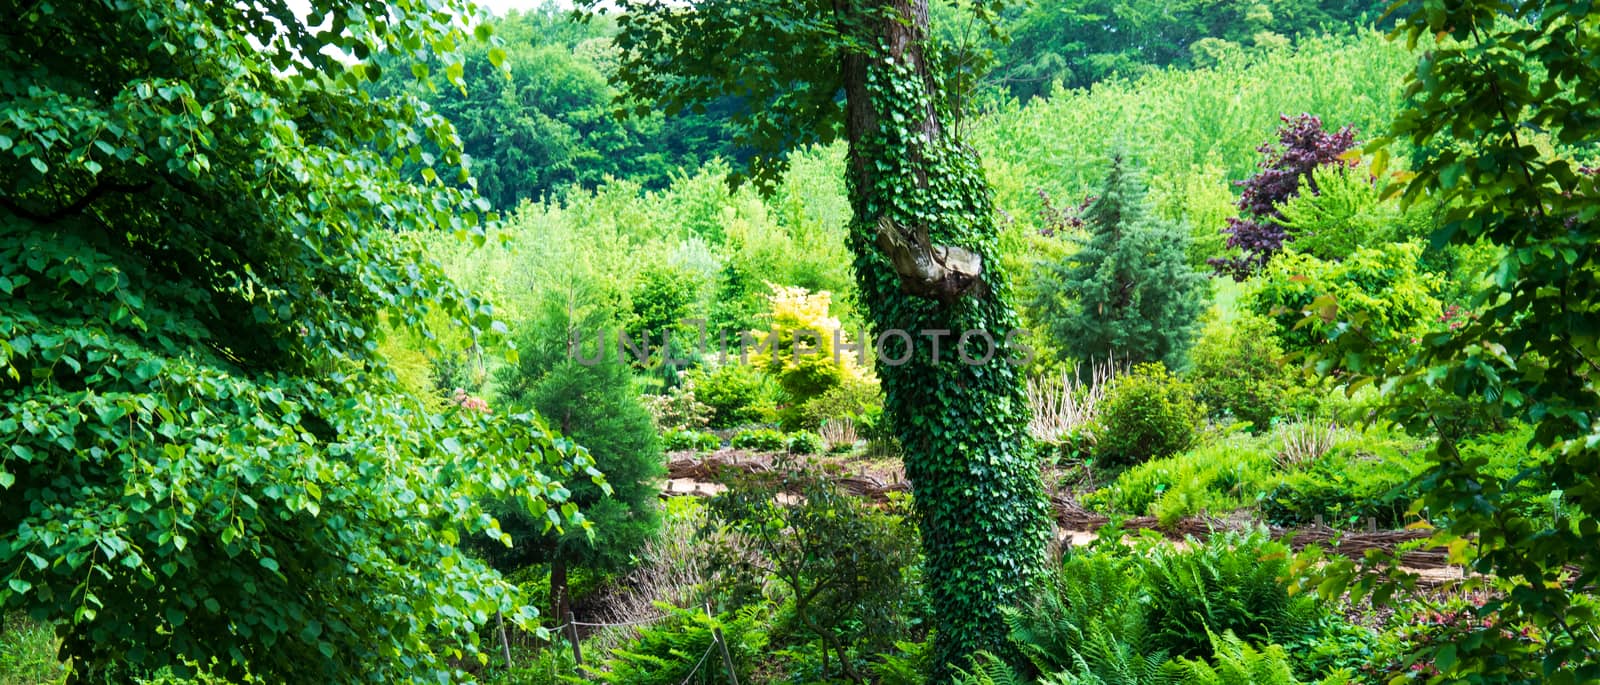 Ivy trees. Tree trunk bark cover by foliage. green vine growth on wood against green bushes land scape. Leaves climbing on tree trunk in woodland. rustic rural, peaceful scene. botanical wallpaper.